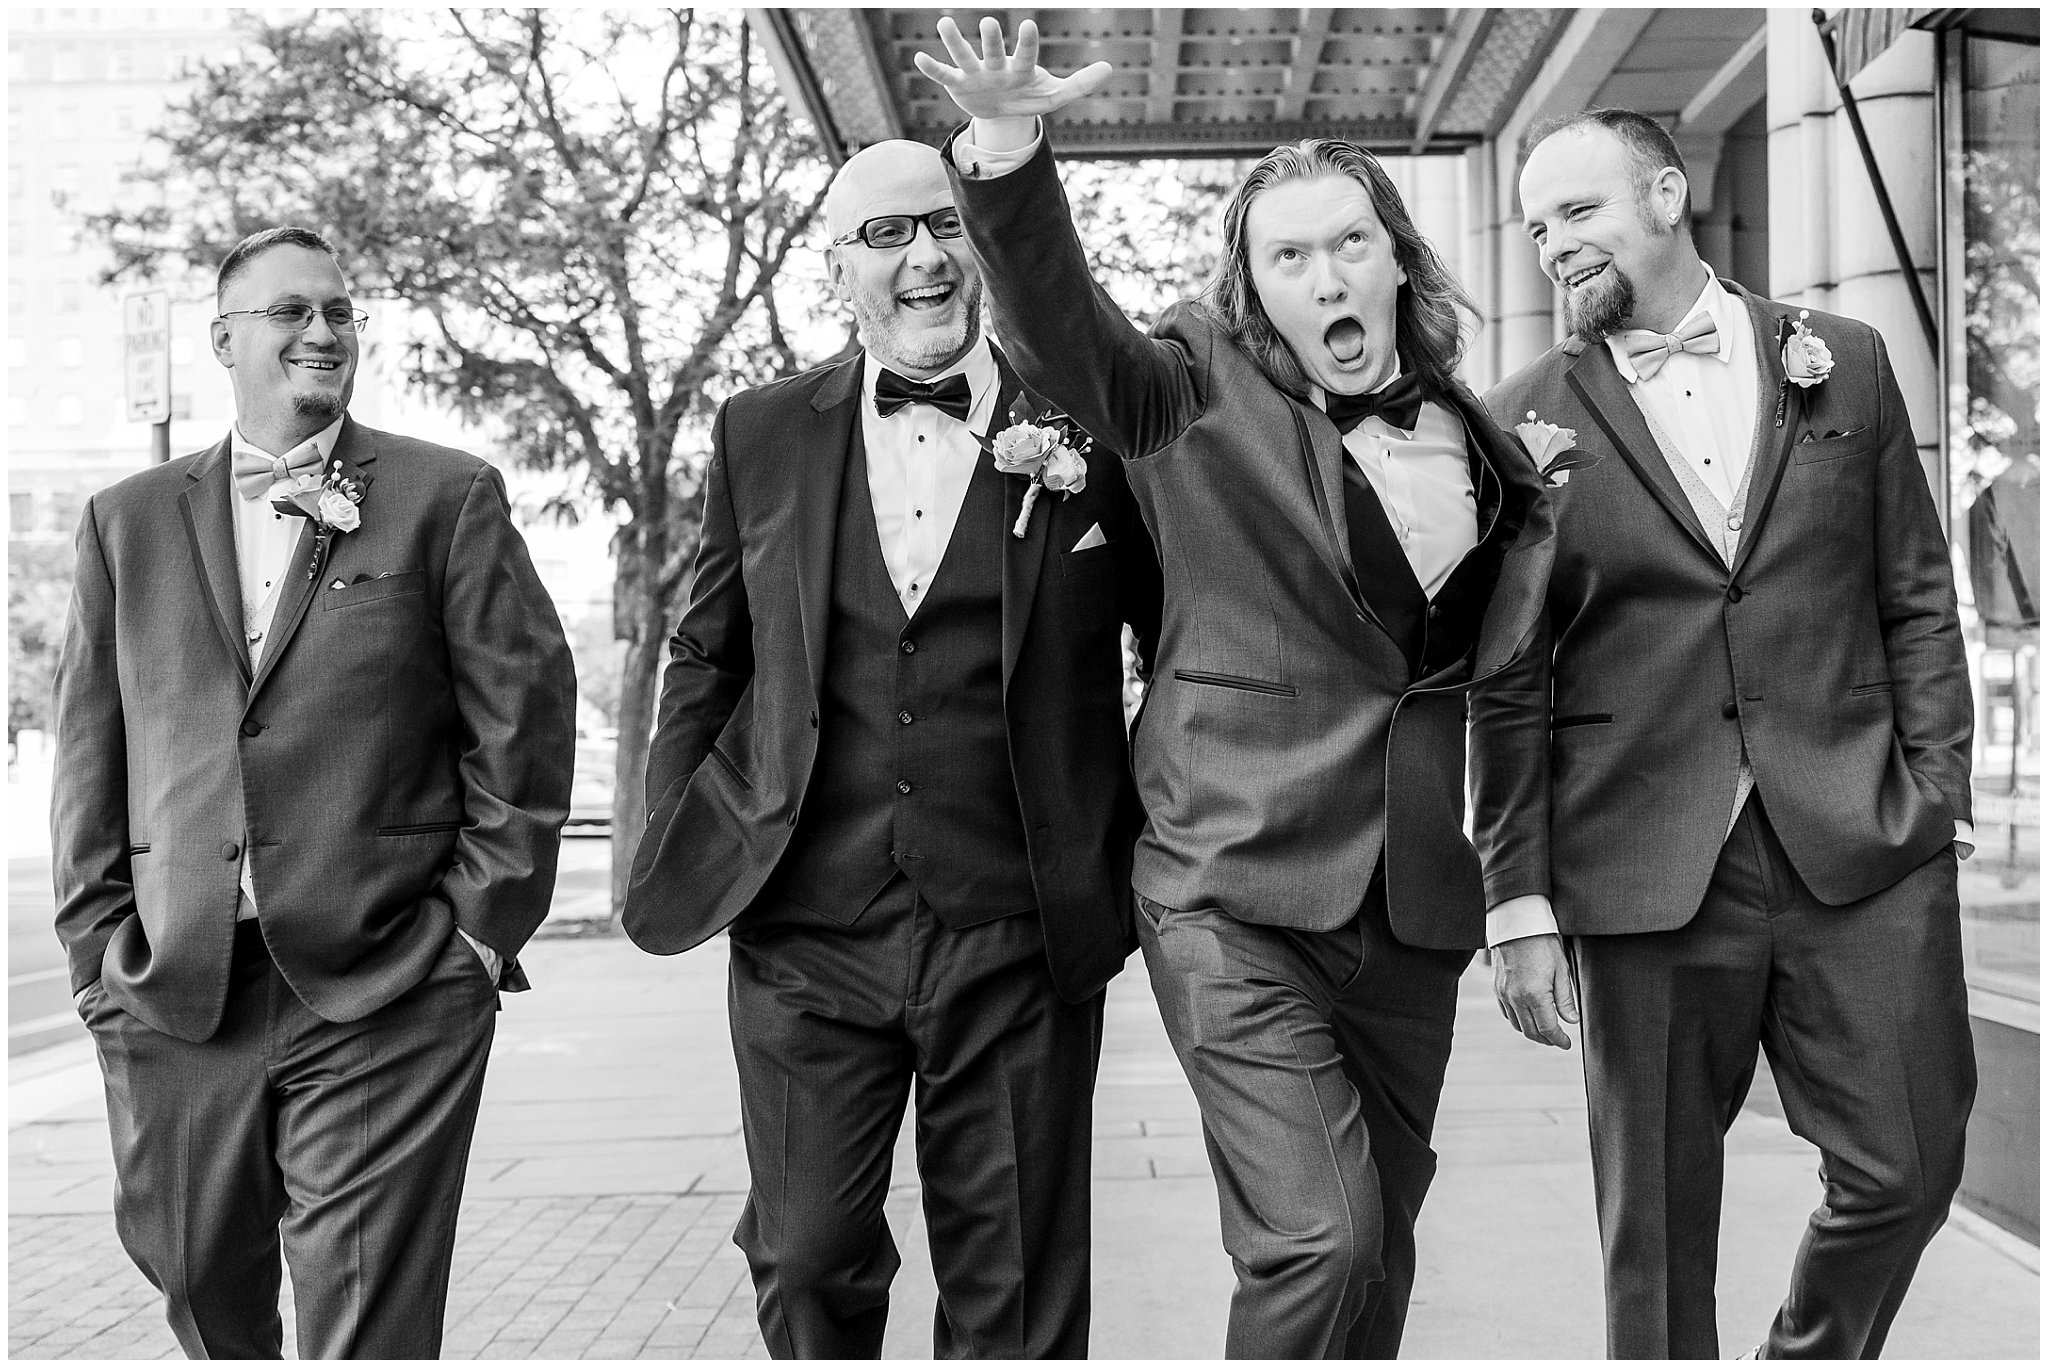 Wedding party portraits outside theater | Broadway Musical Theatre Wedding